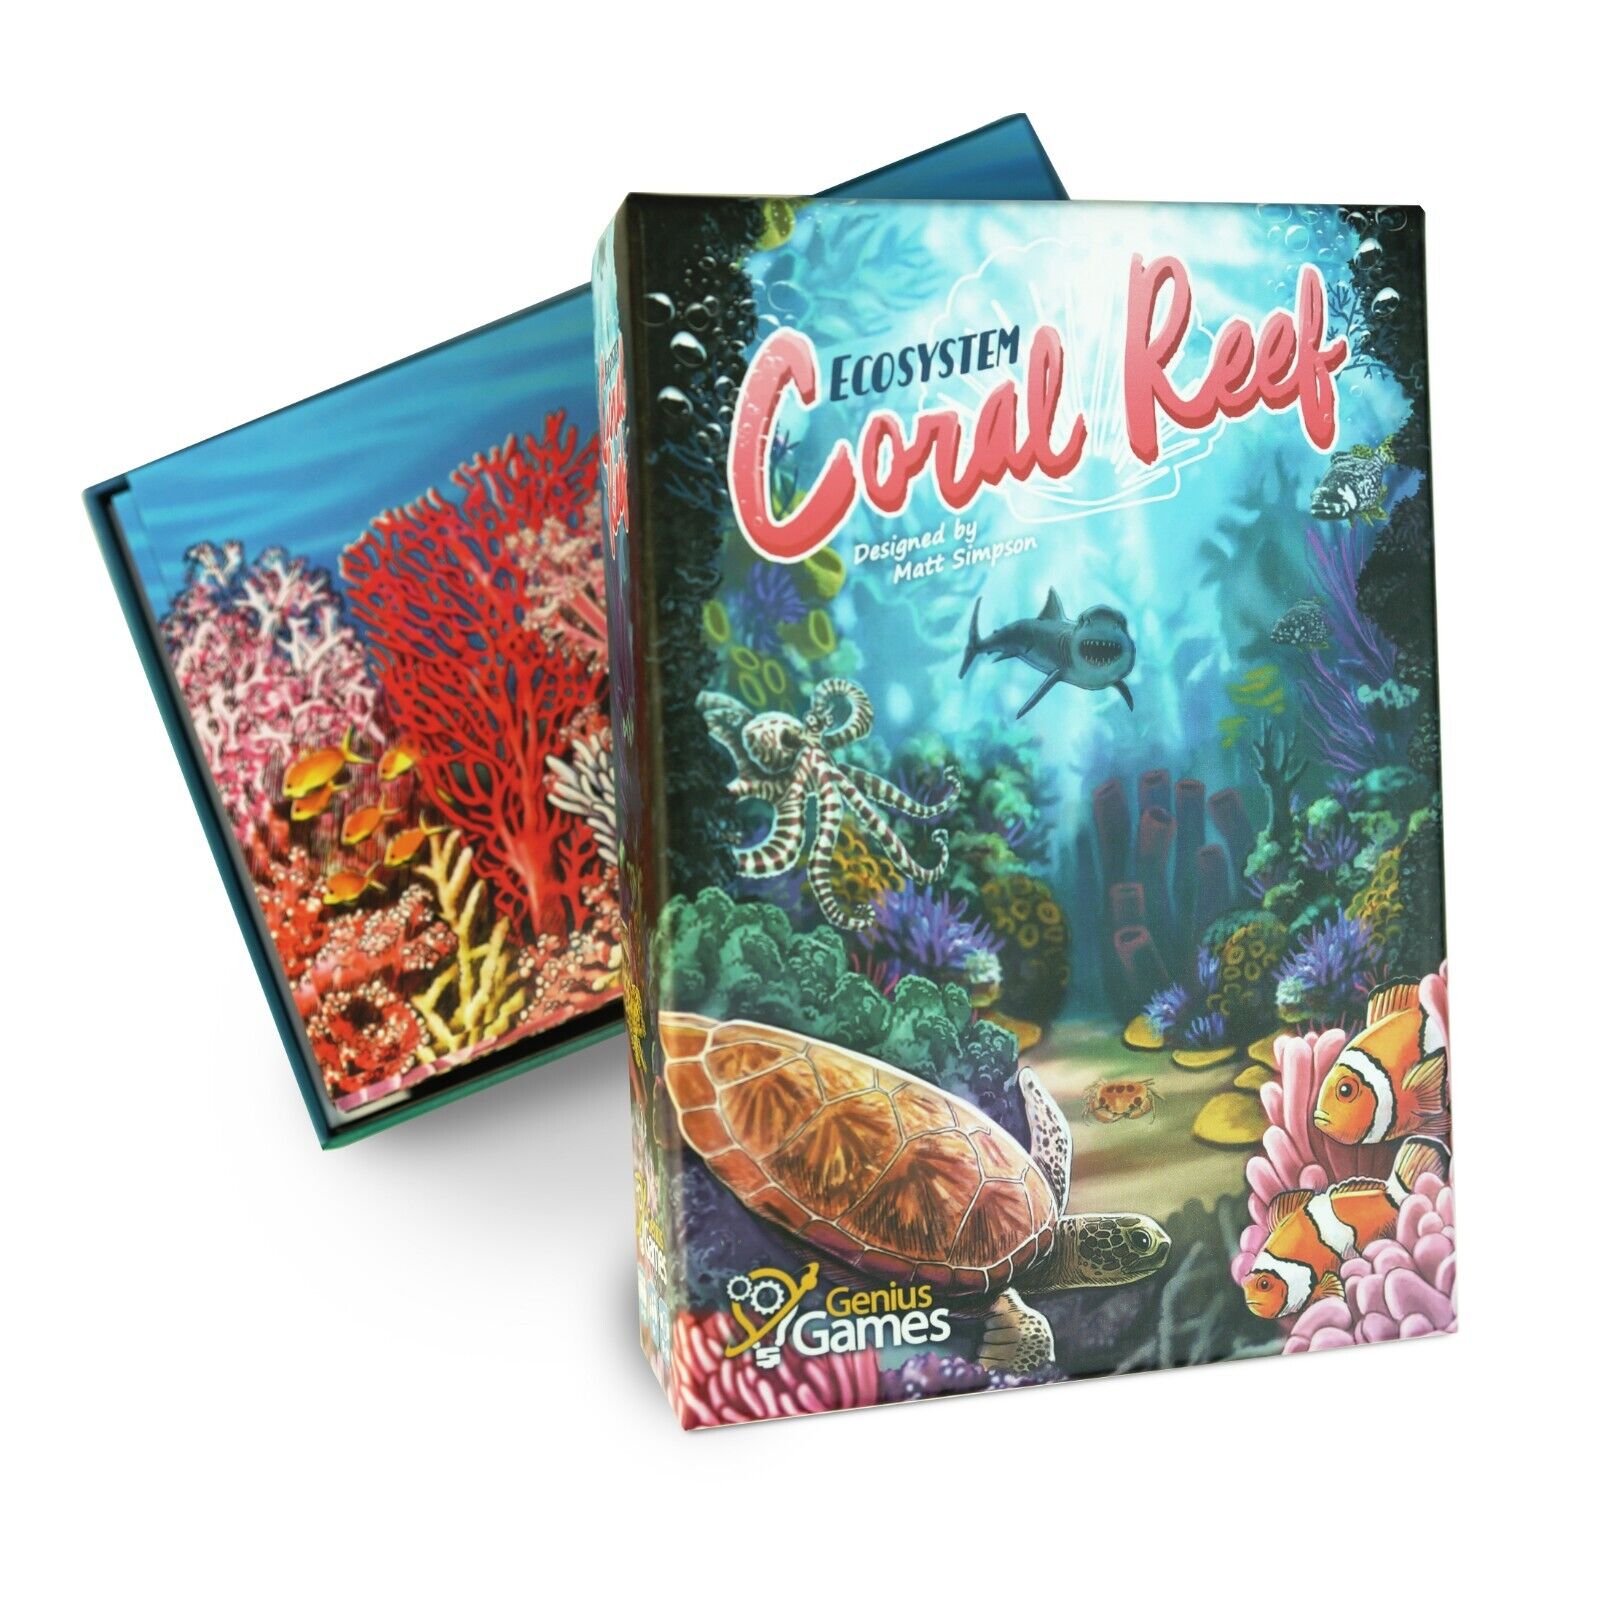 Ecosystem Coral Reef An Ecology Card Drafting Game of Marine Animal Competition